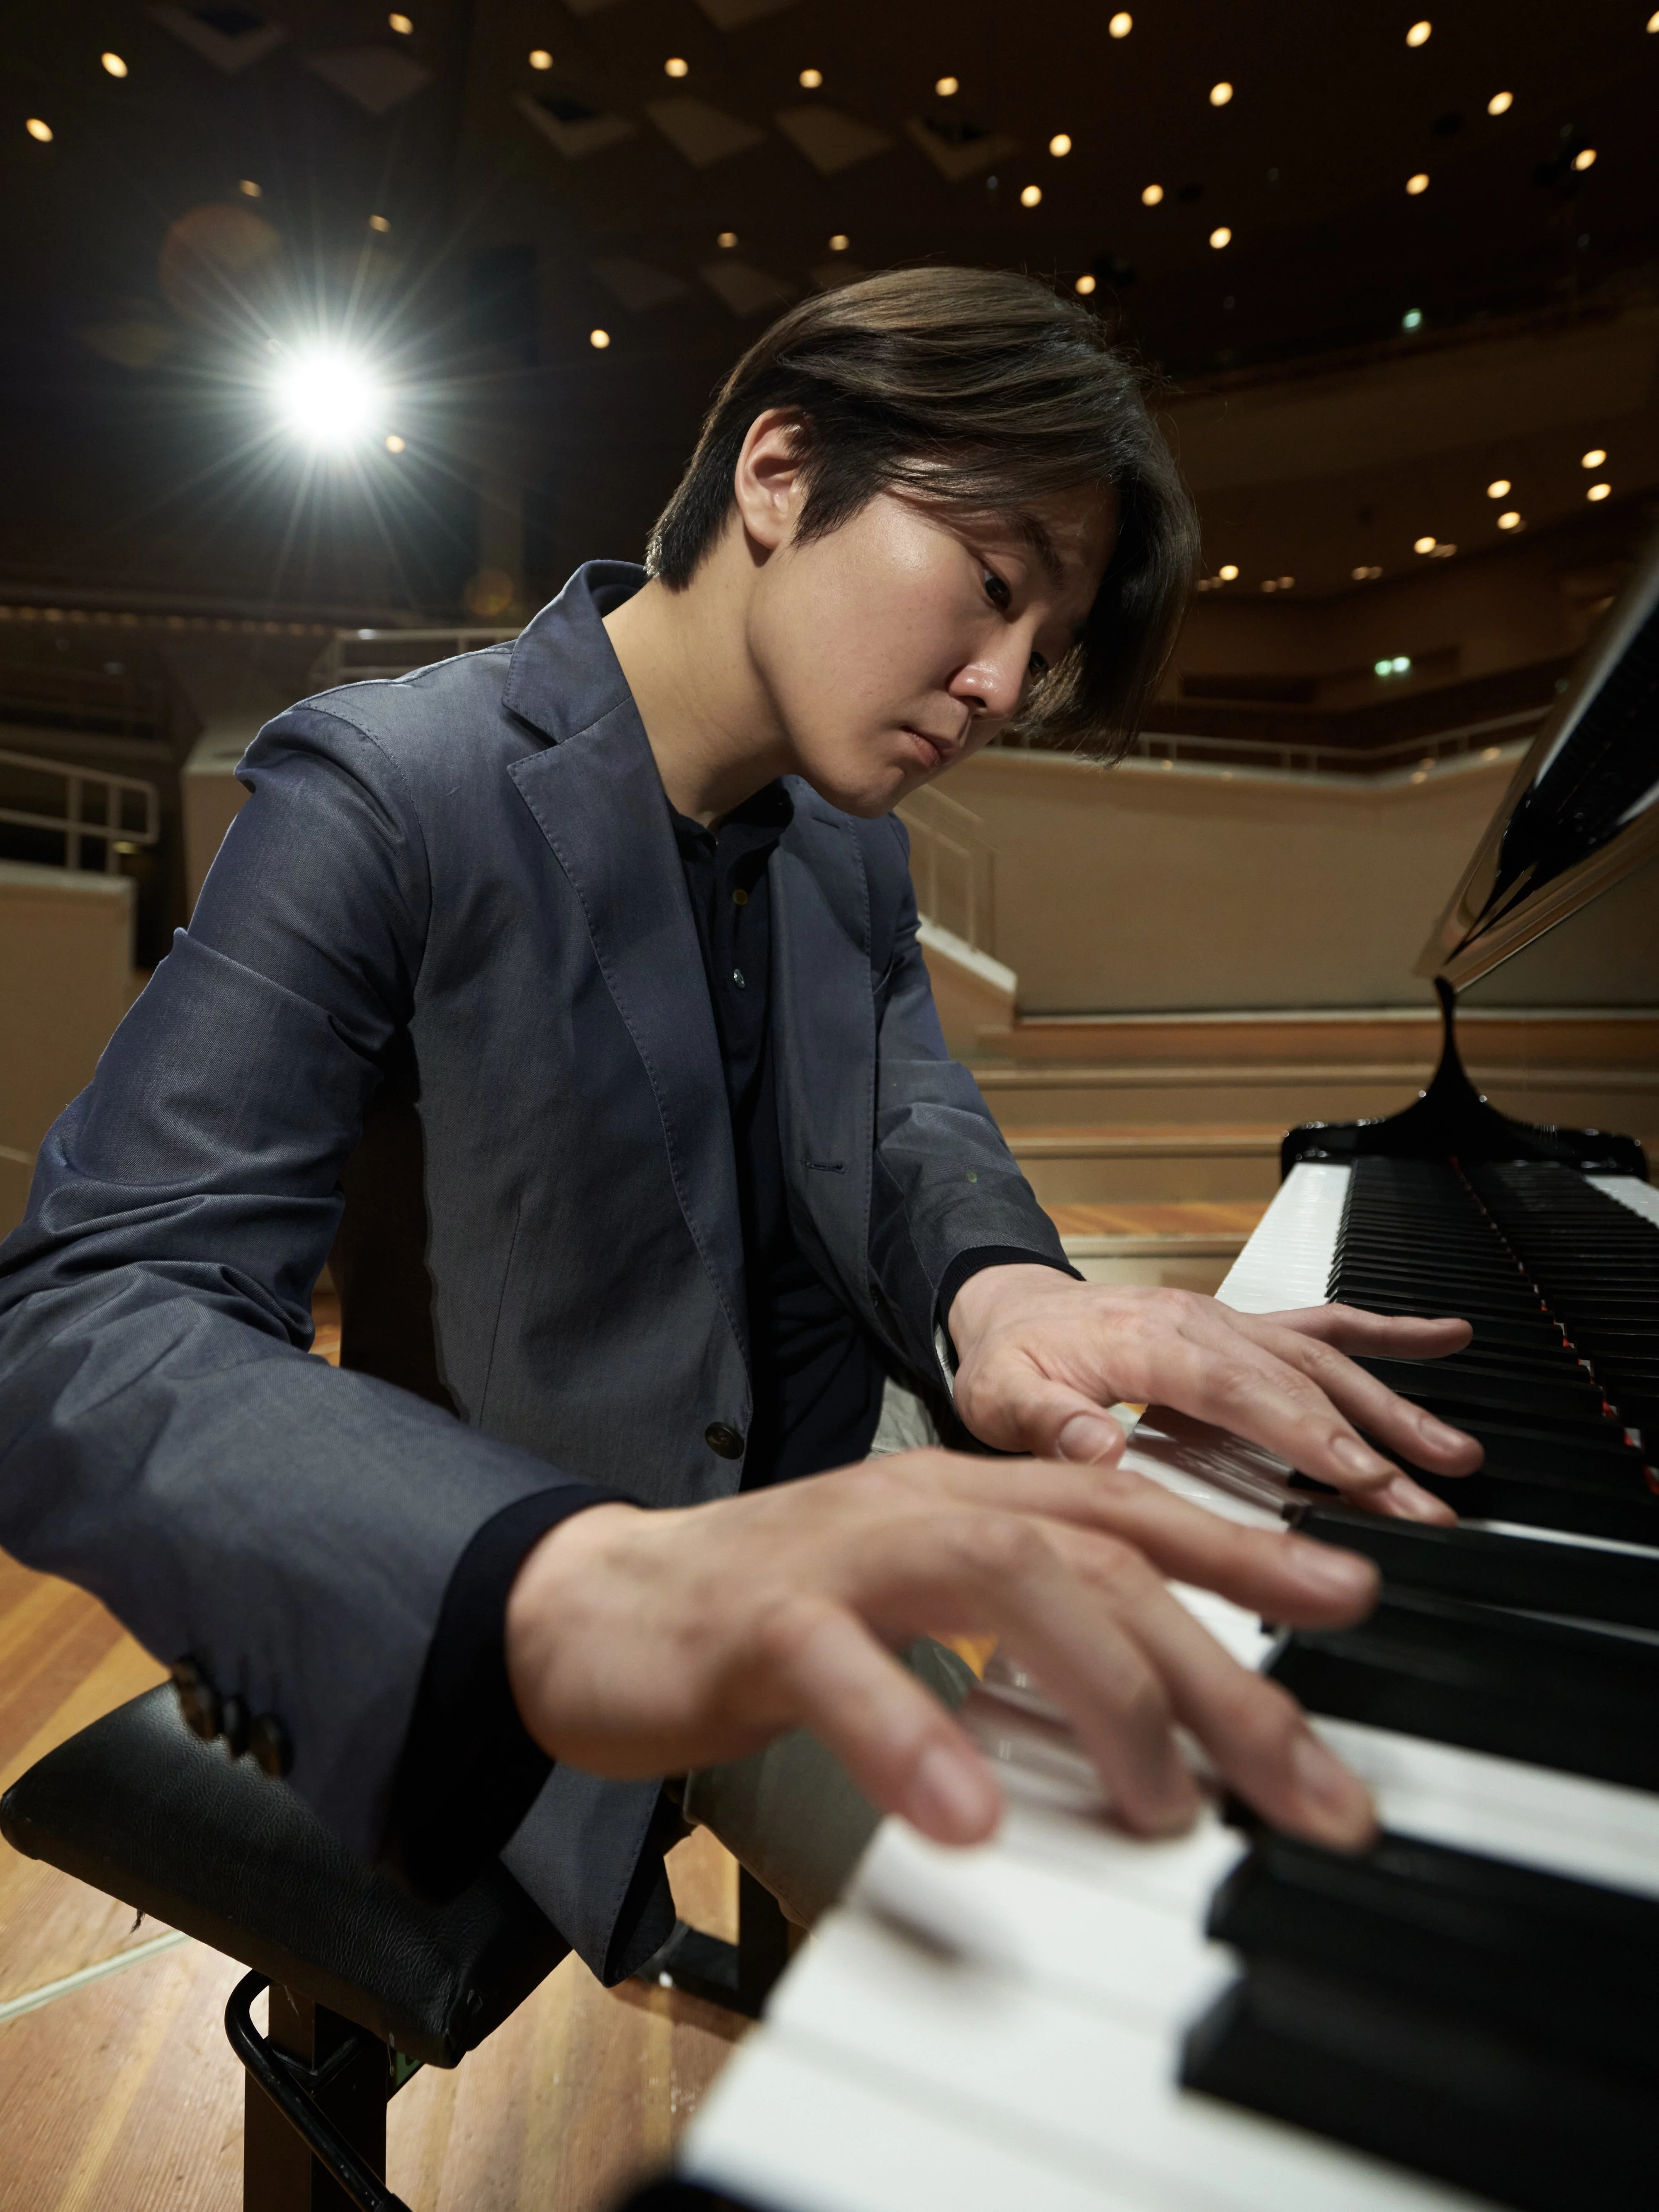 Pianist Seong-Jin Cho plays a grand piano on the empty stage of the Philharmonie.